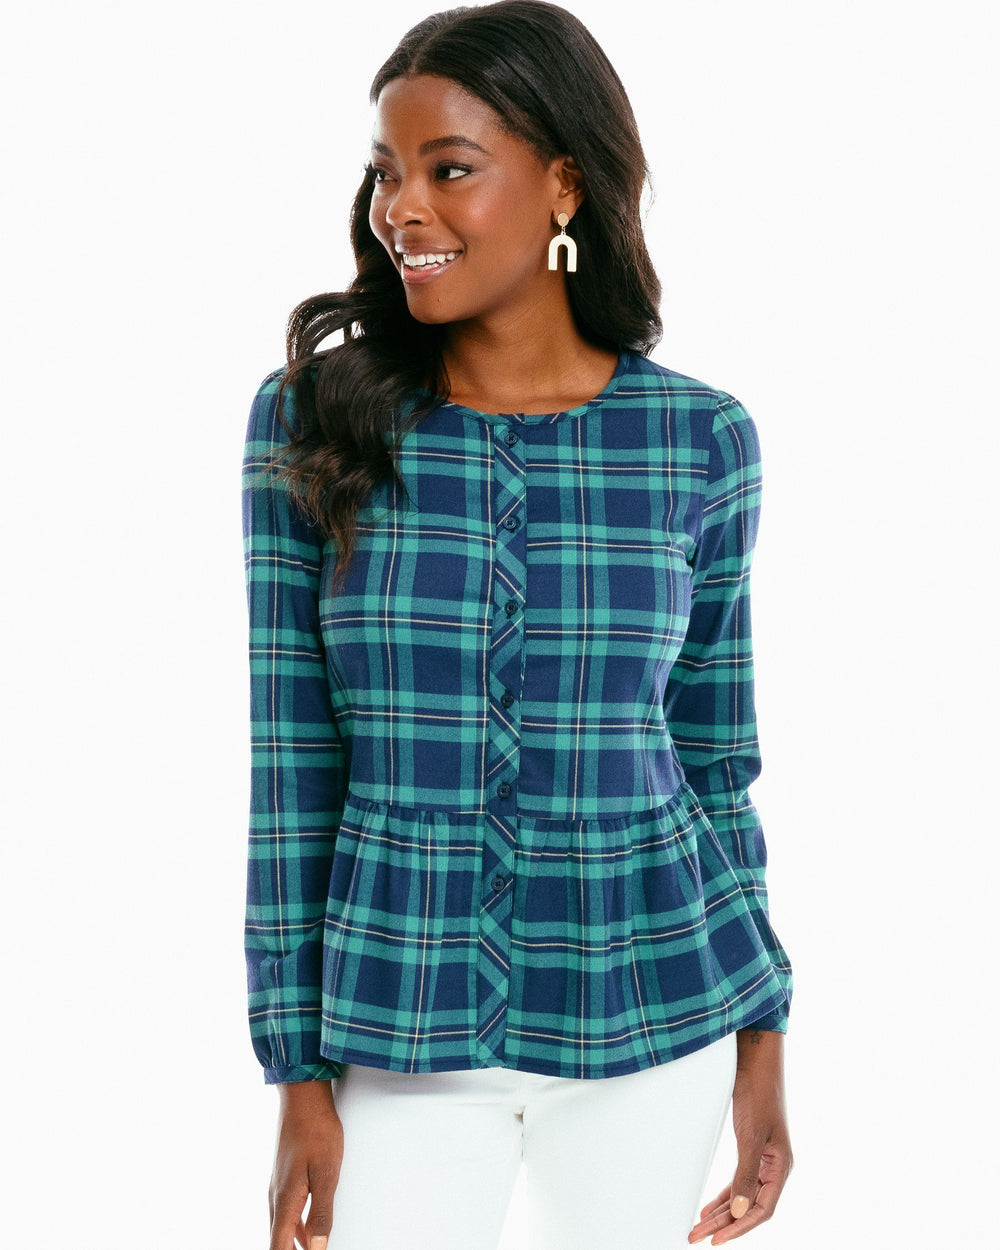 The front of the Women's Preston Flannel Intercoastal Top by Southern Tide - Evening Emerald